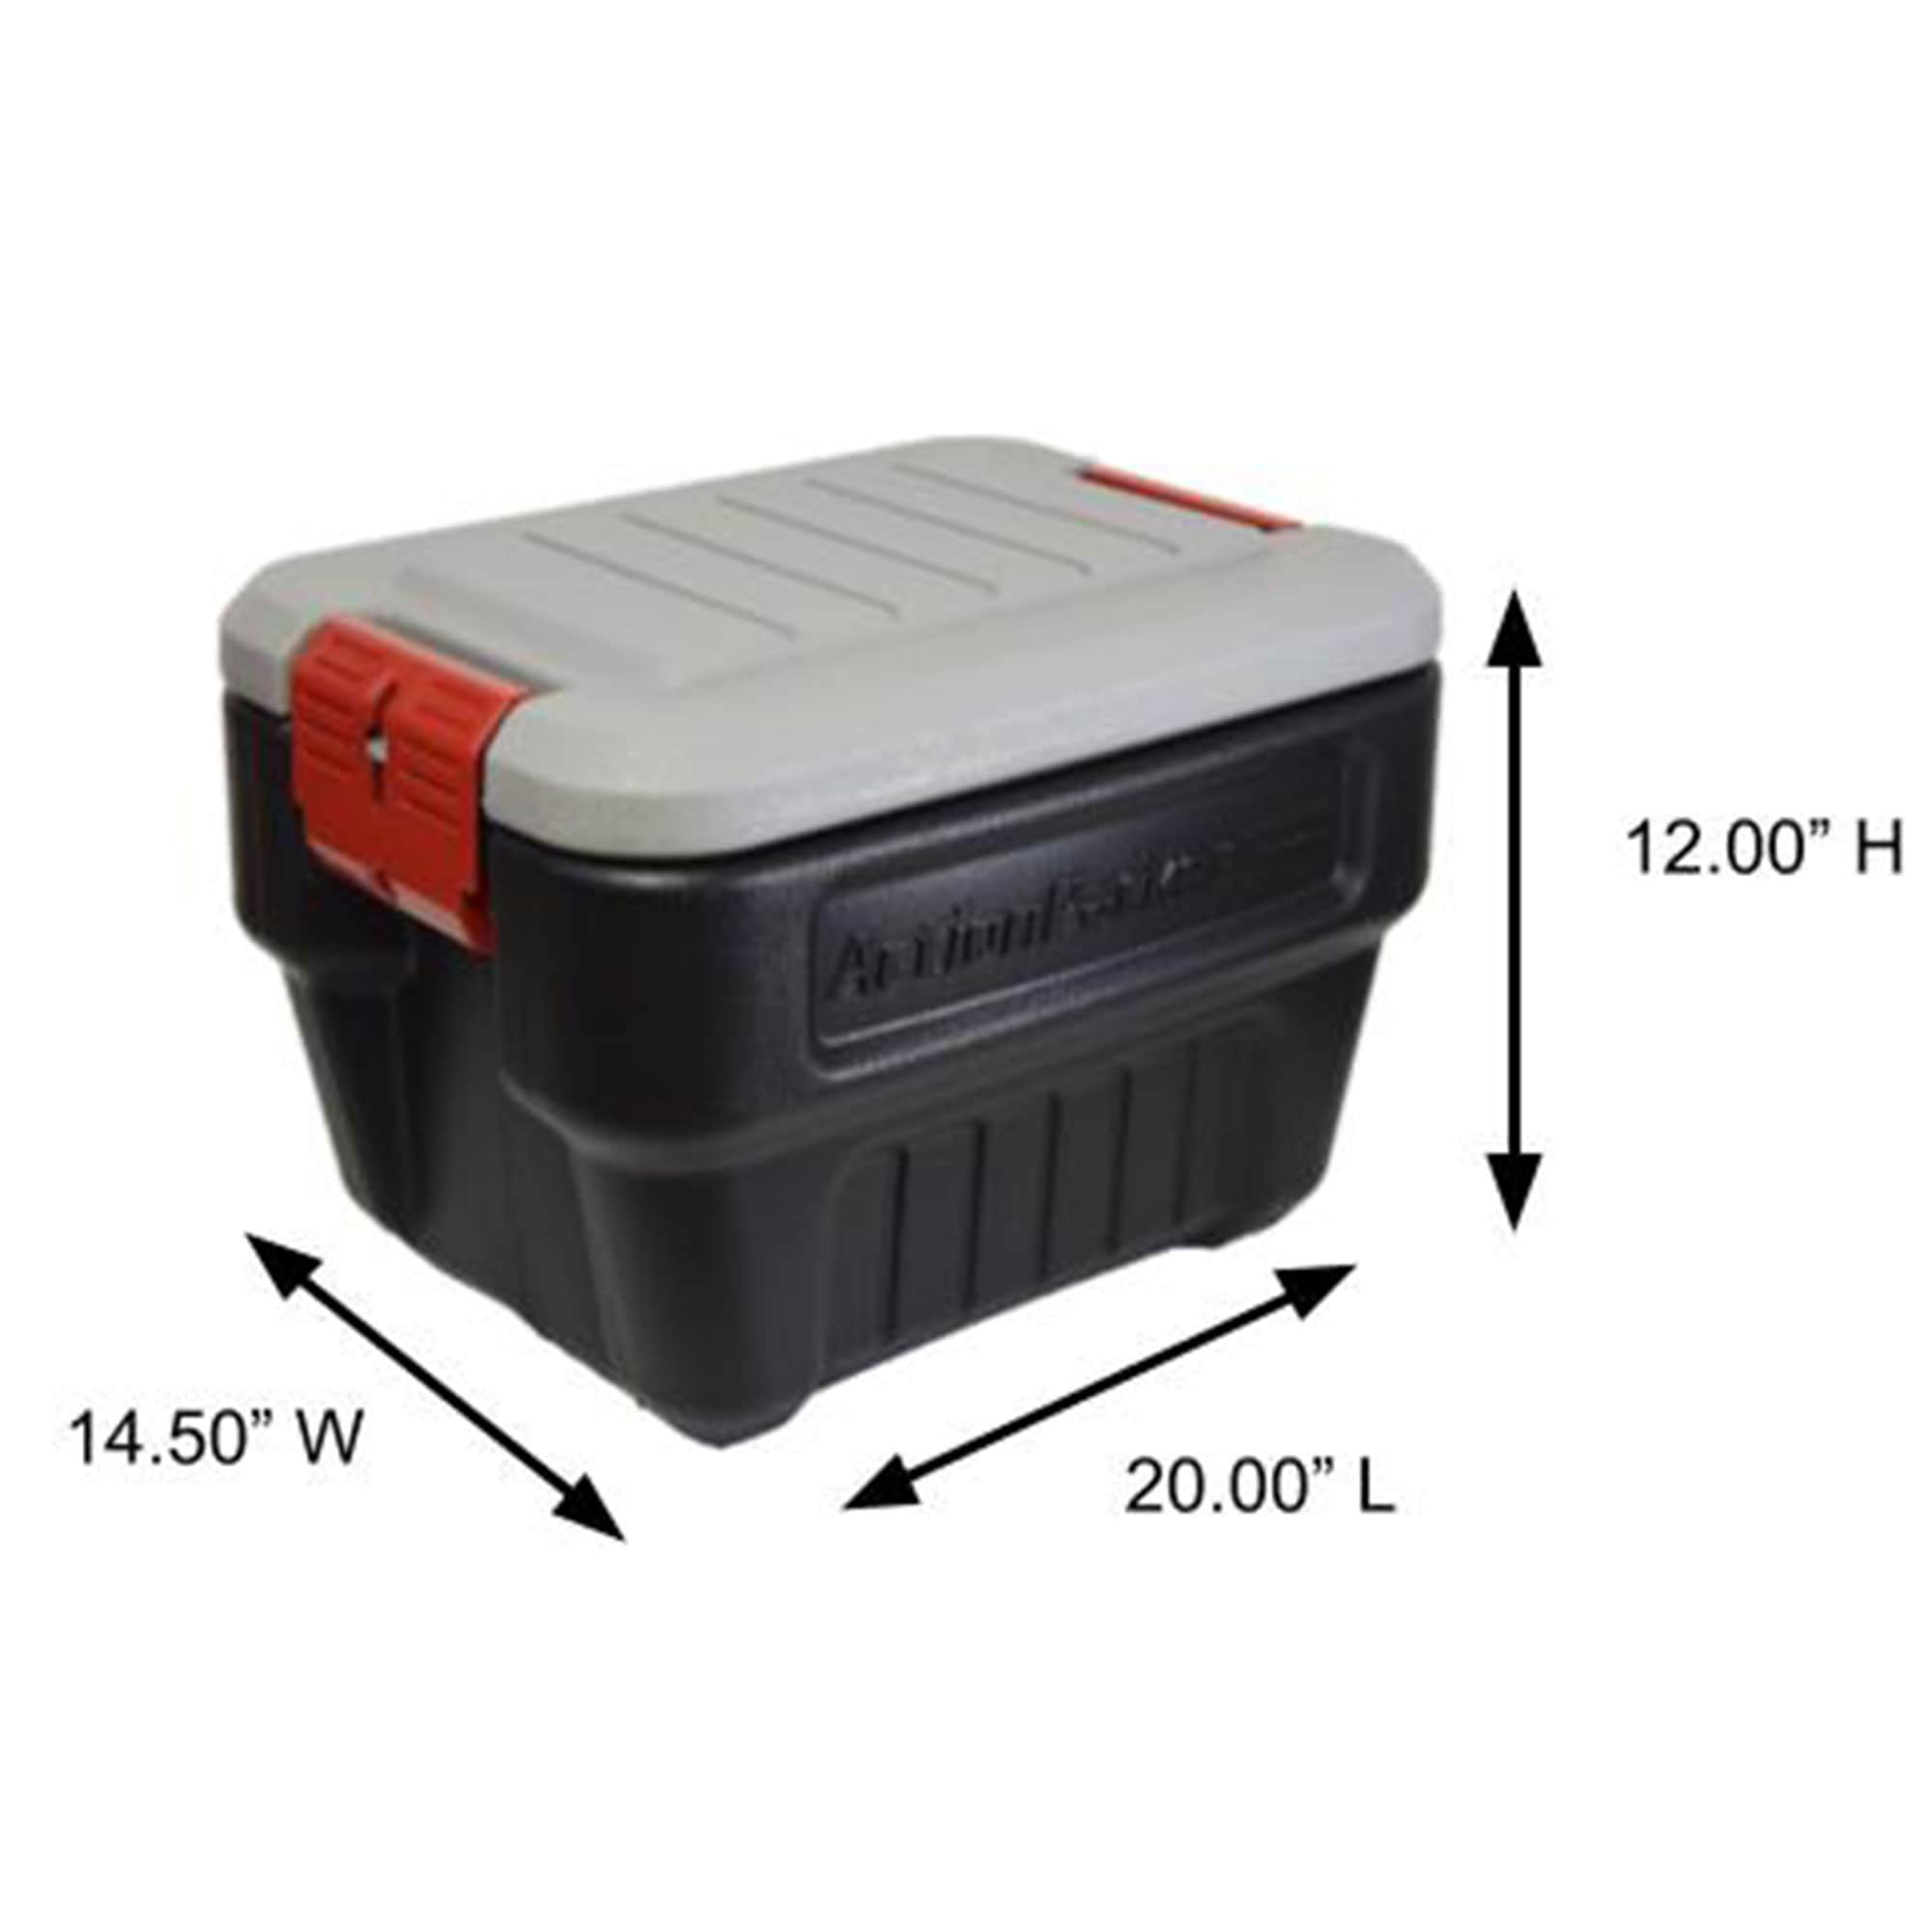 Rubbermaid 35 Gallon Action Packer Storage Bin, Heavy Duty Plastic,  Lockable, Black and Gray, Included Lid